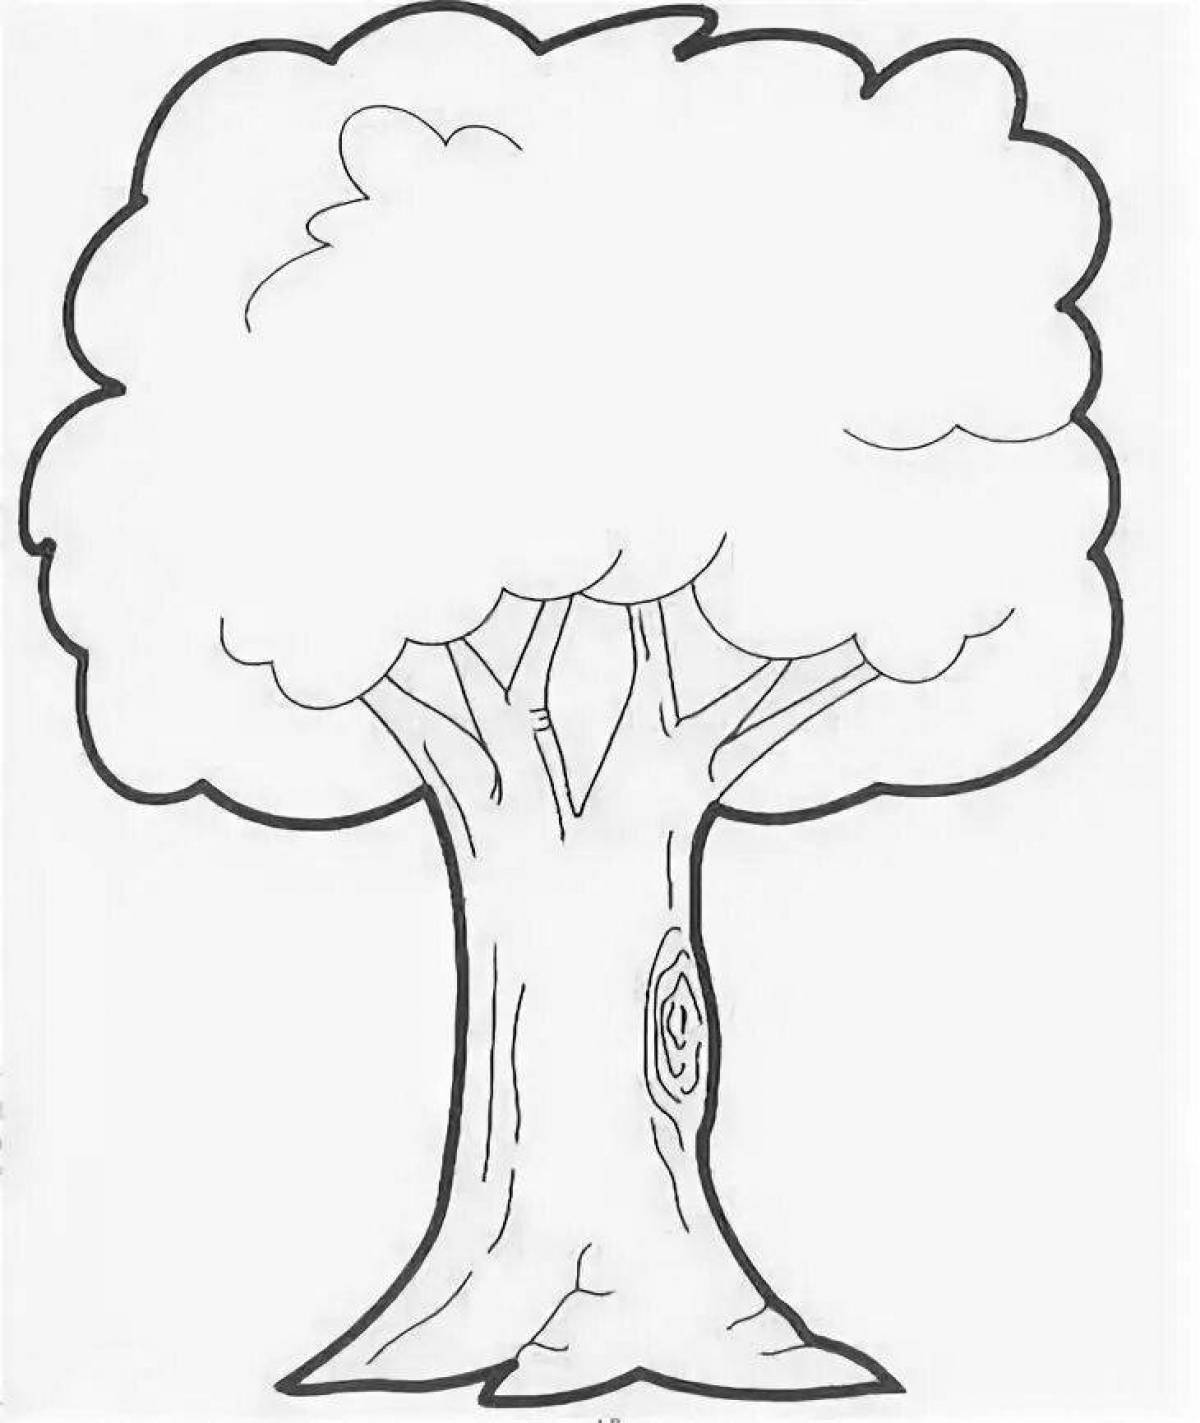 Cute pattern tree coloring page